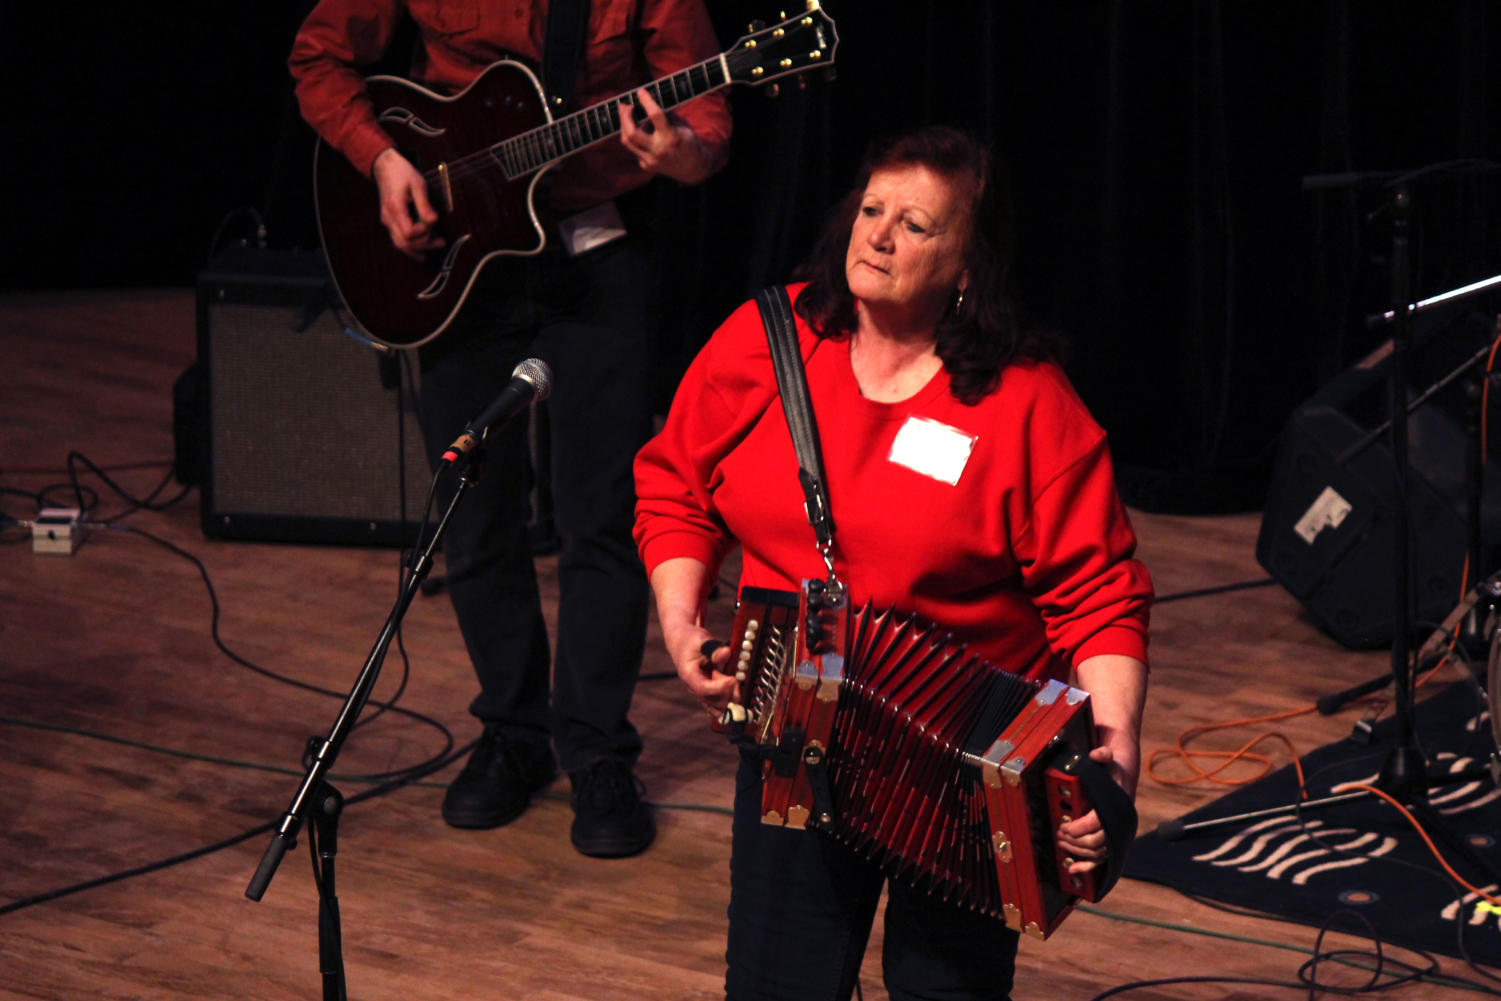 Sheryl Cormier and her Cajun band, including her husband on washboard and her grandson on drums, play on the Mandel Hall stage Friday night.